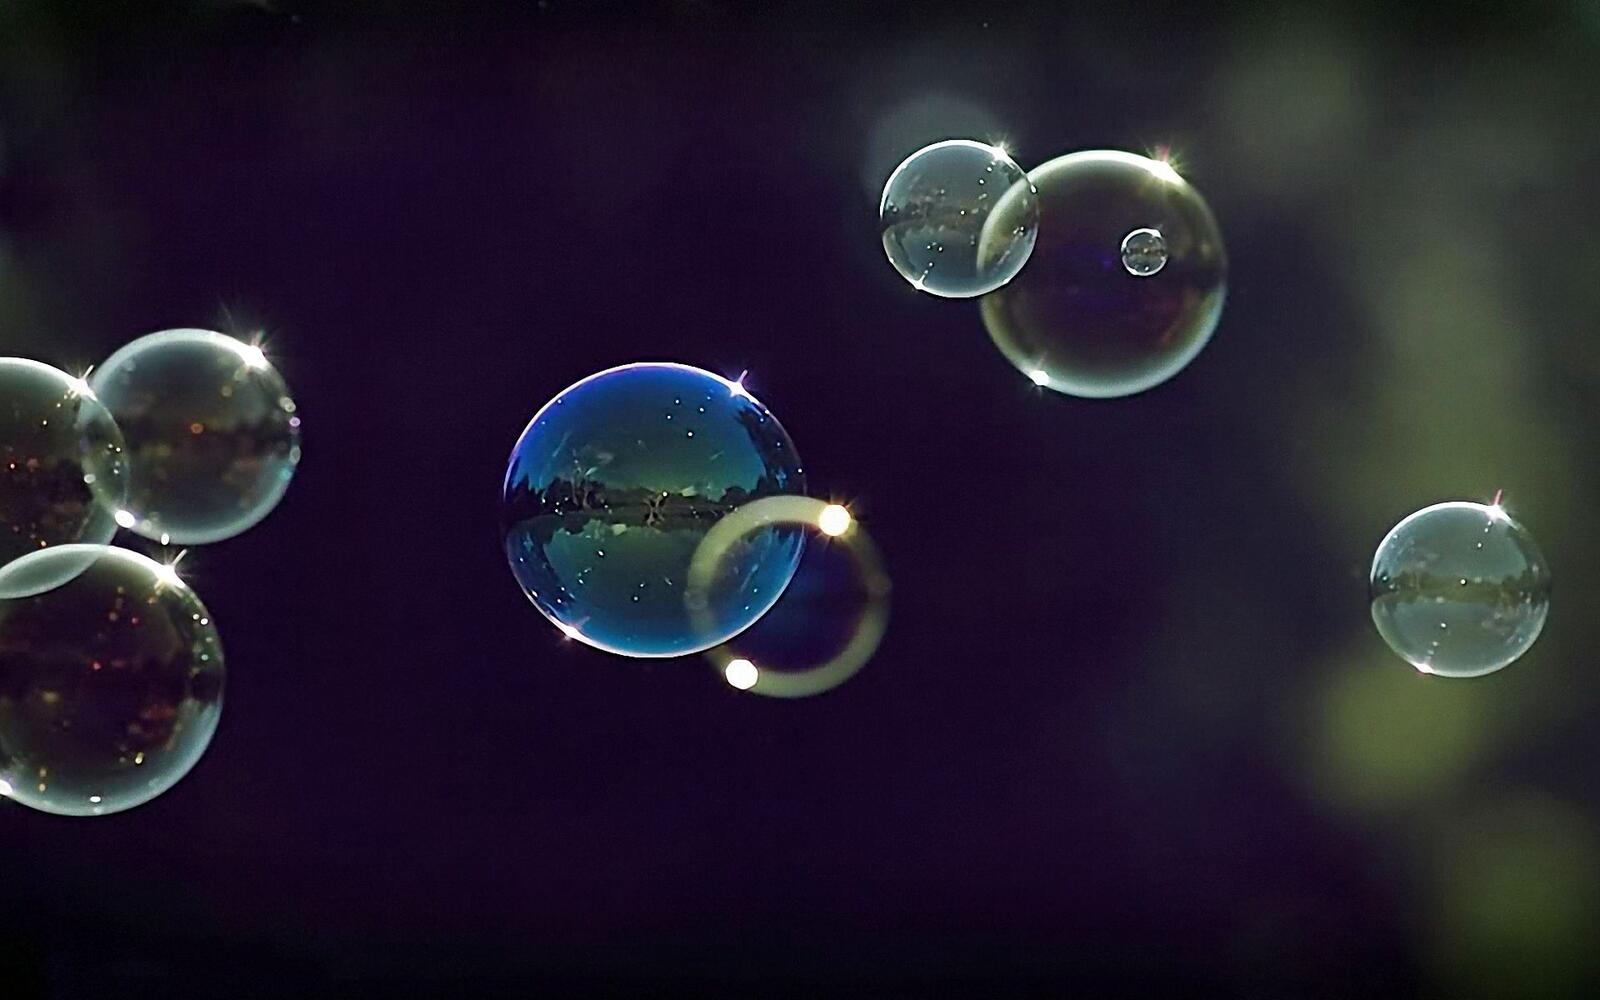 Wallpapers soap bubbles flare reflection on the desktop